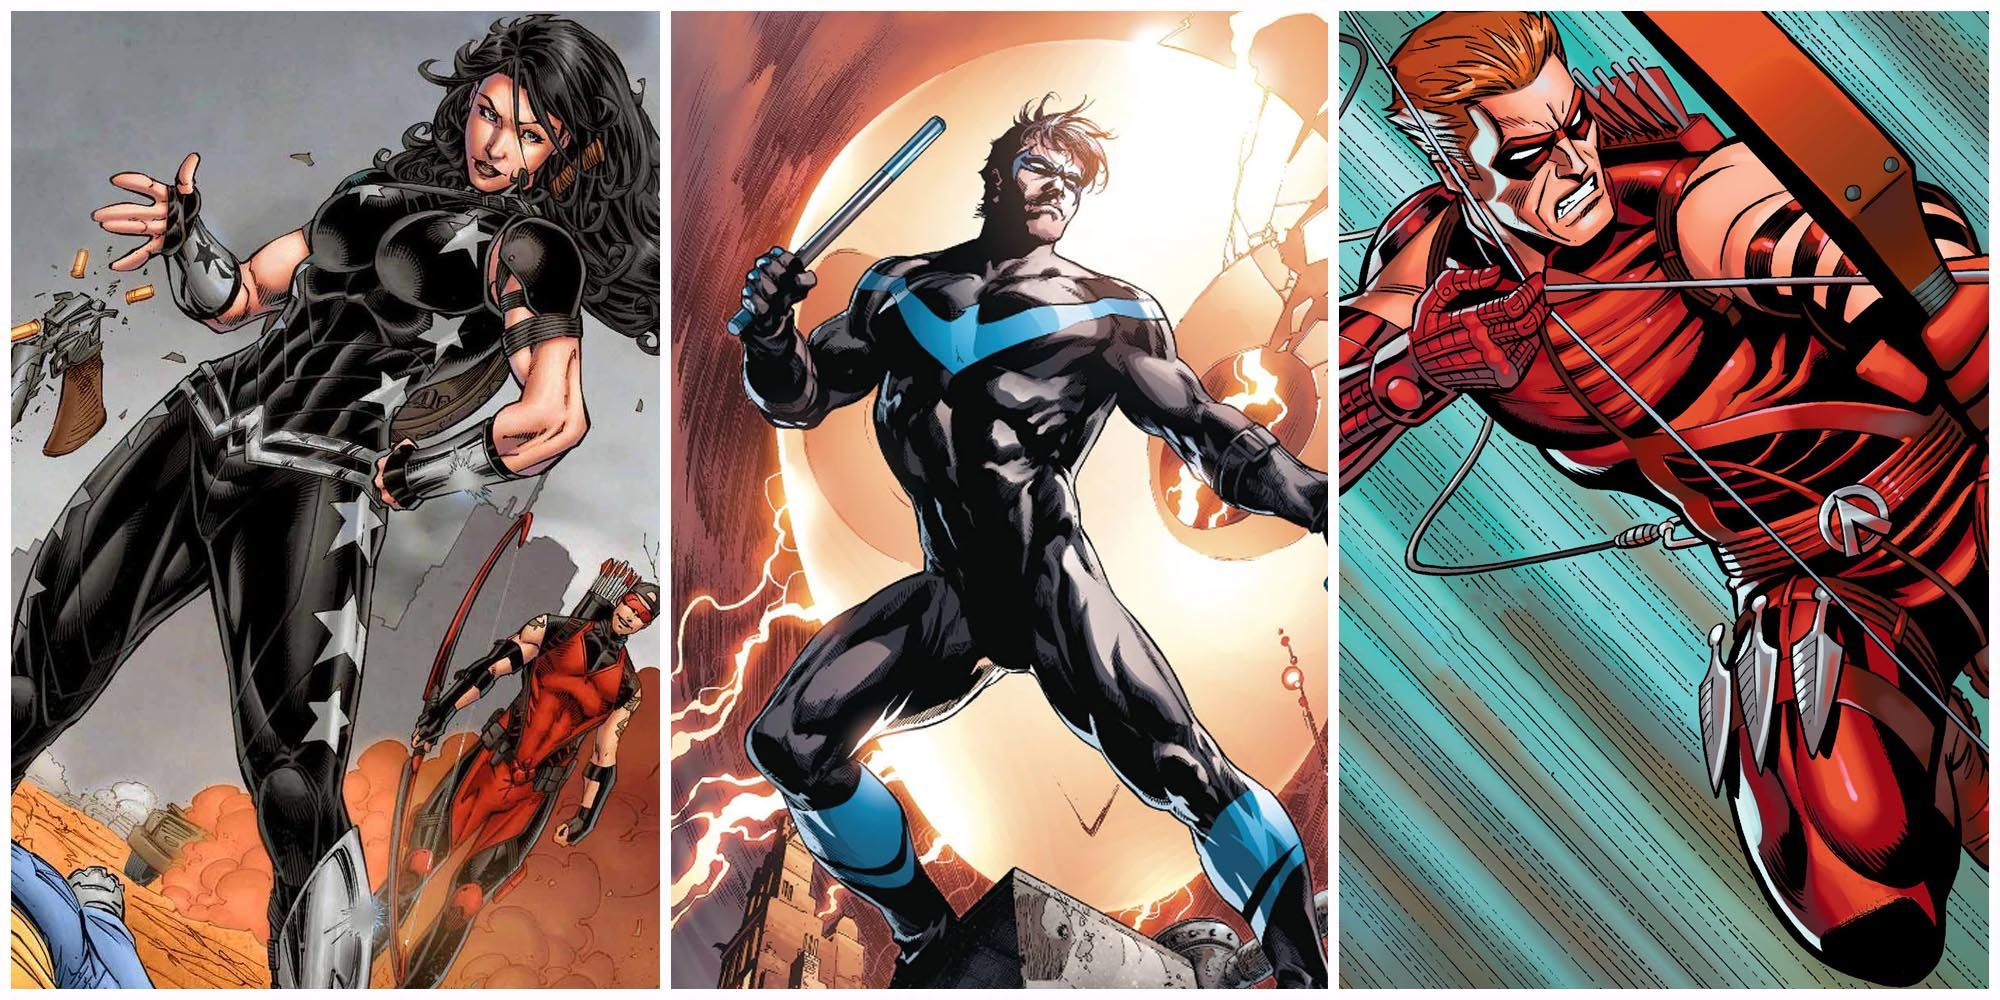 Donna Troy, Dick Grayson and Roy Harper in action